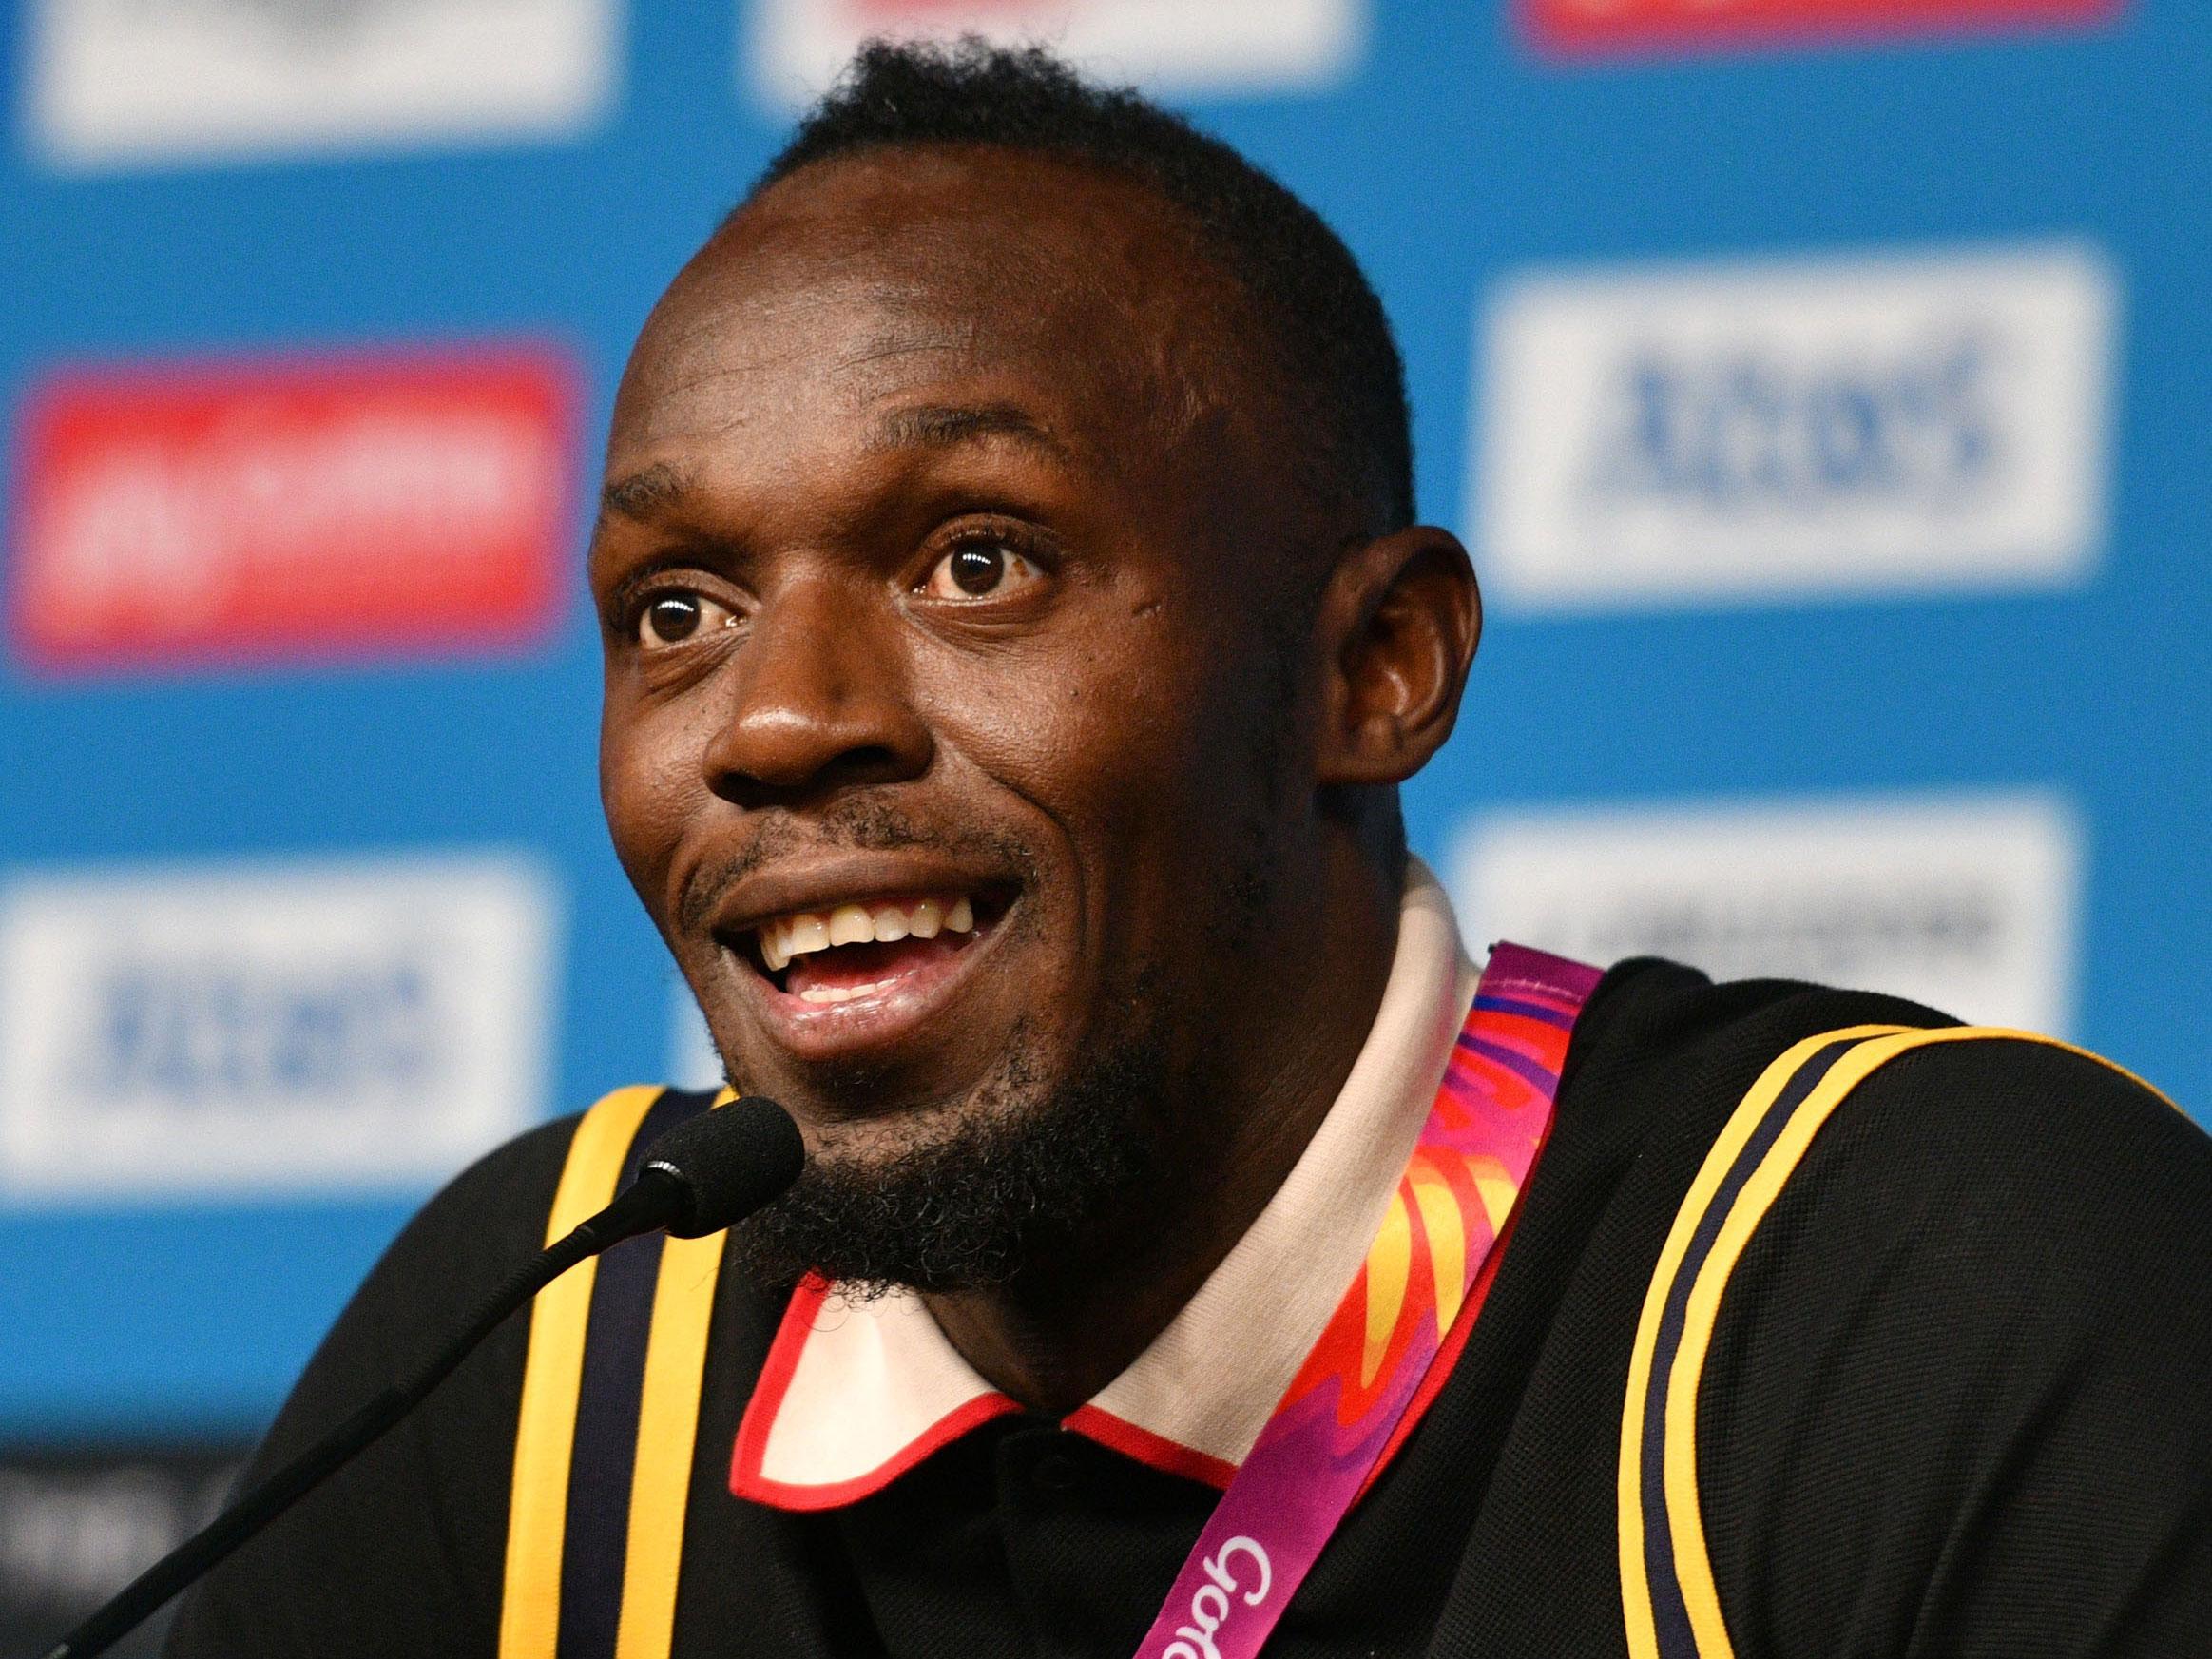 Usain Bolt watched his former teammate miss out on gold on Monday